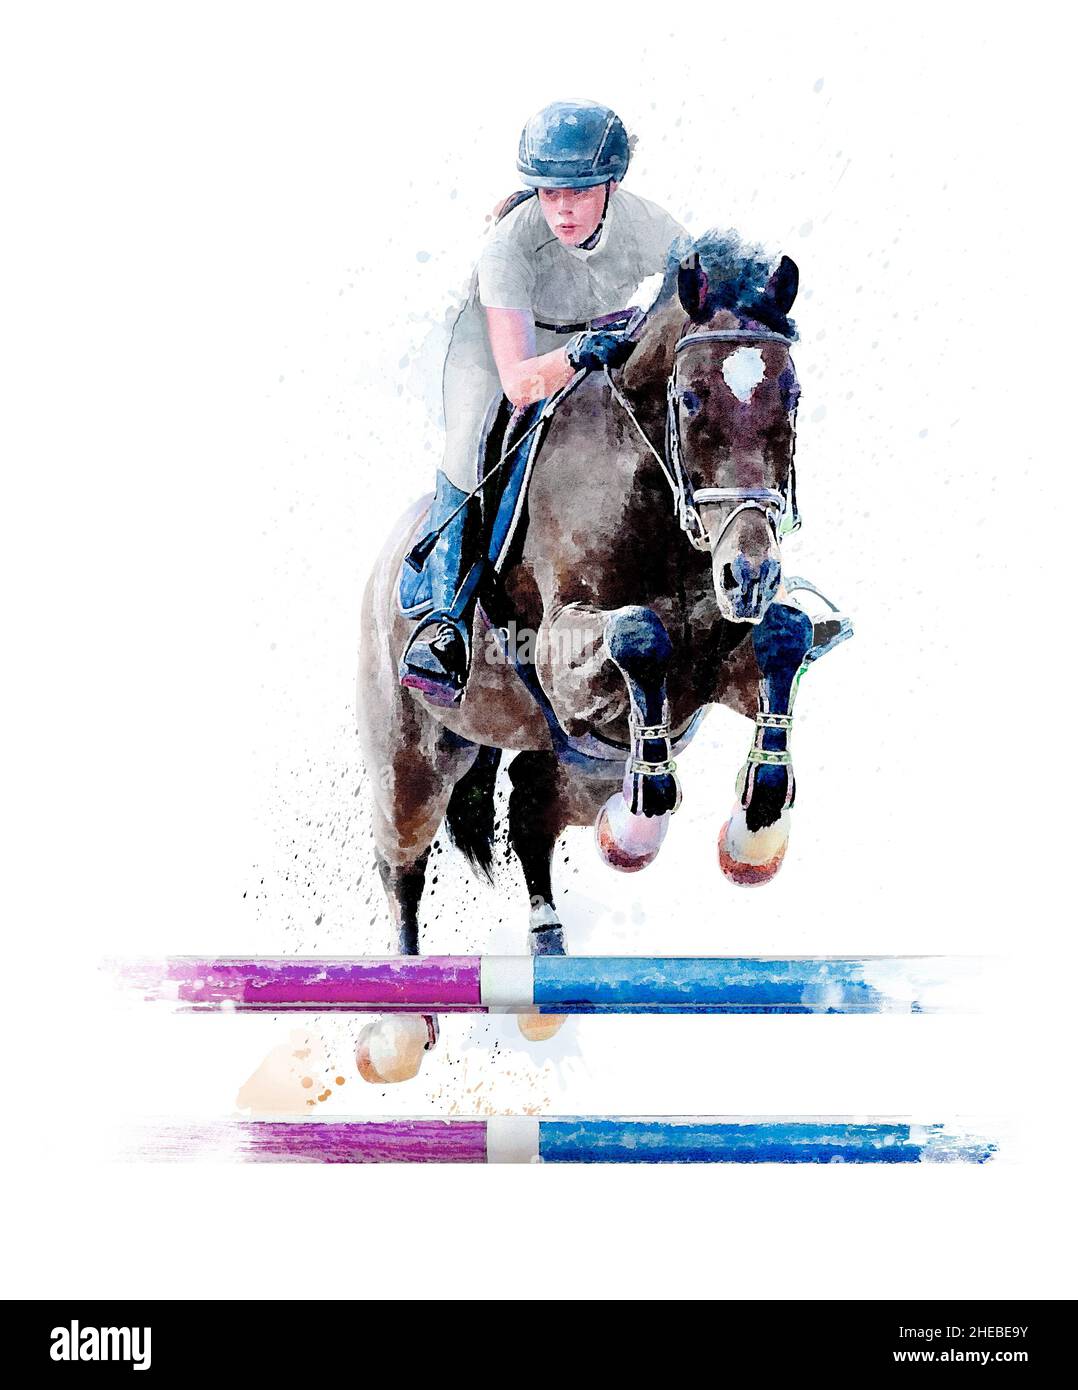 Jockey on horse. Black horse Jumping. Equestrian Events. Show Jumping Competition. Watercolor painting illustration isolated on white background Stock Photo